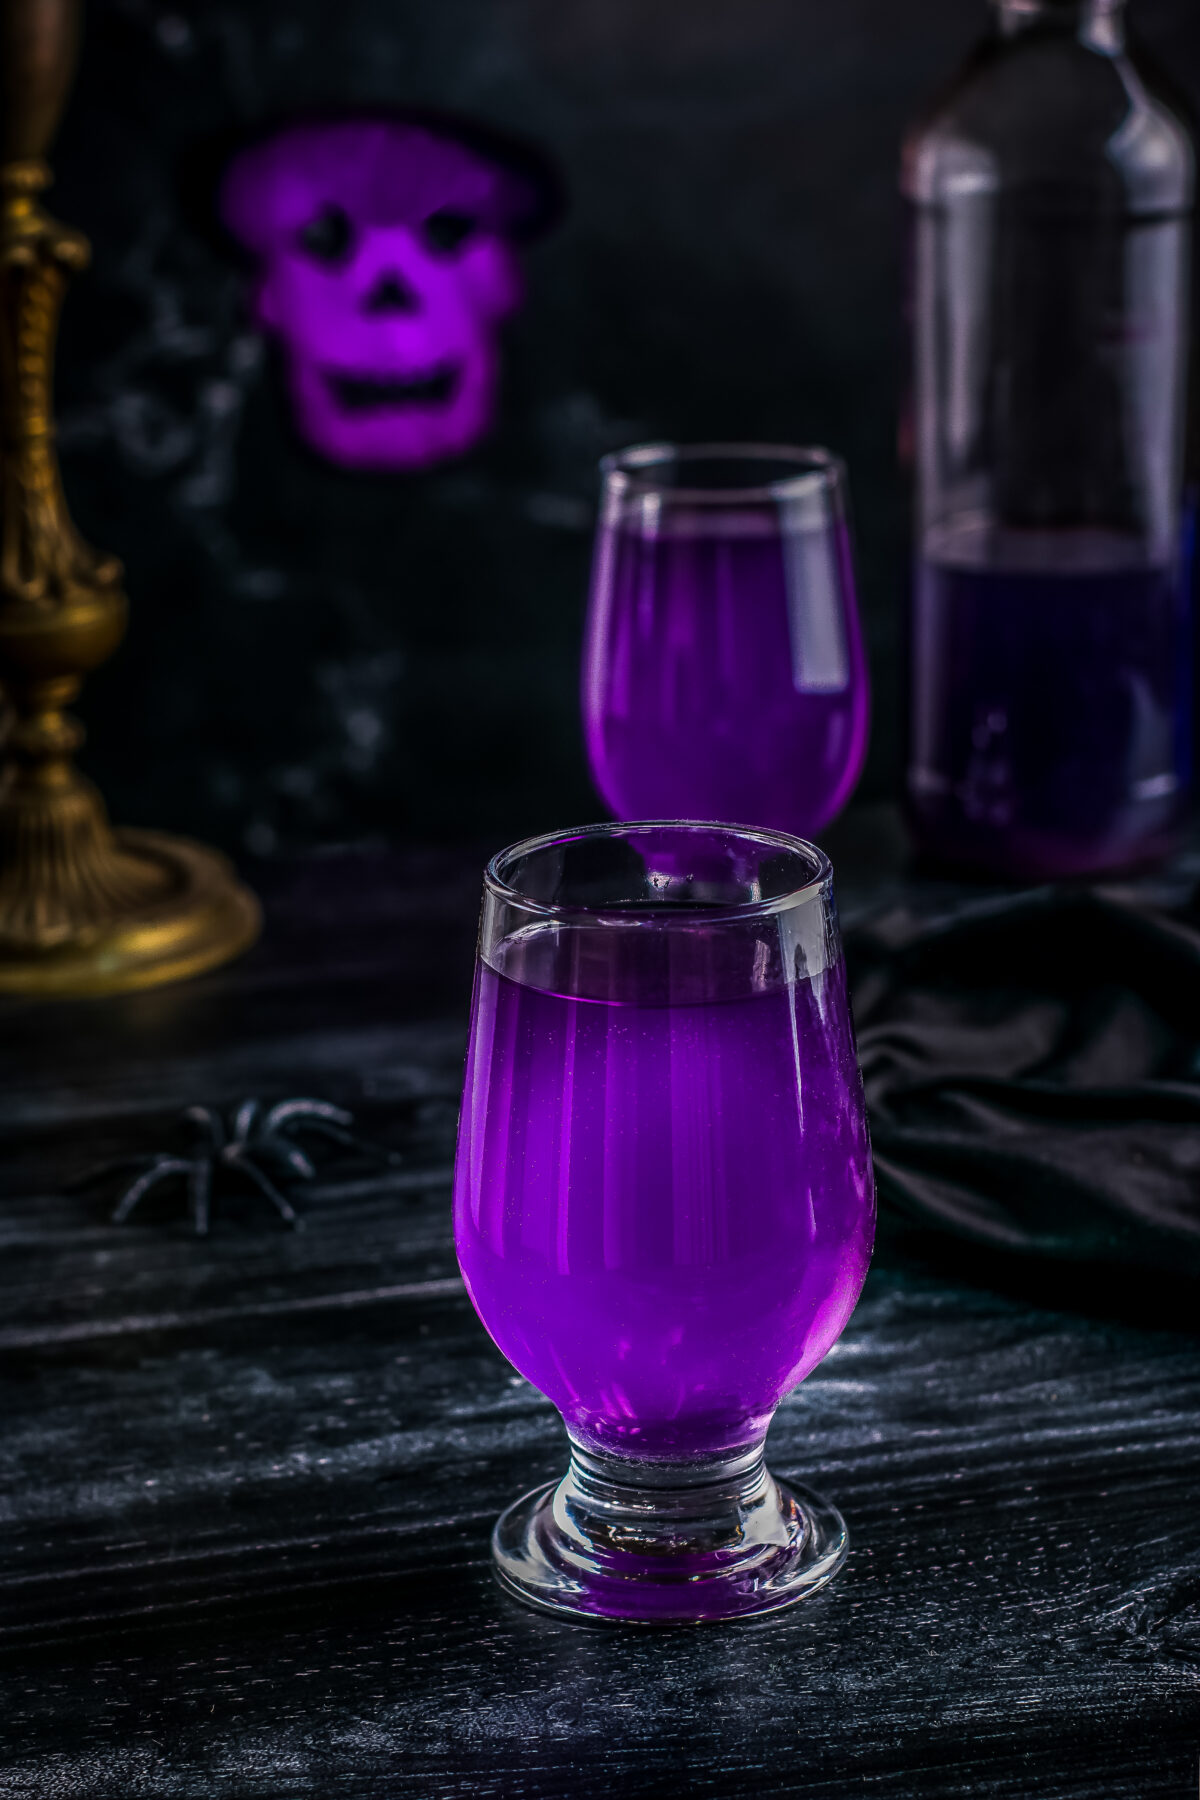 Purple People Eater Halloween Punch is a fun and easy non-alcoholic punch recipe that kids will love for this year's Halloween party.